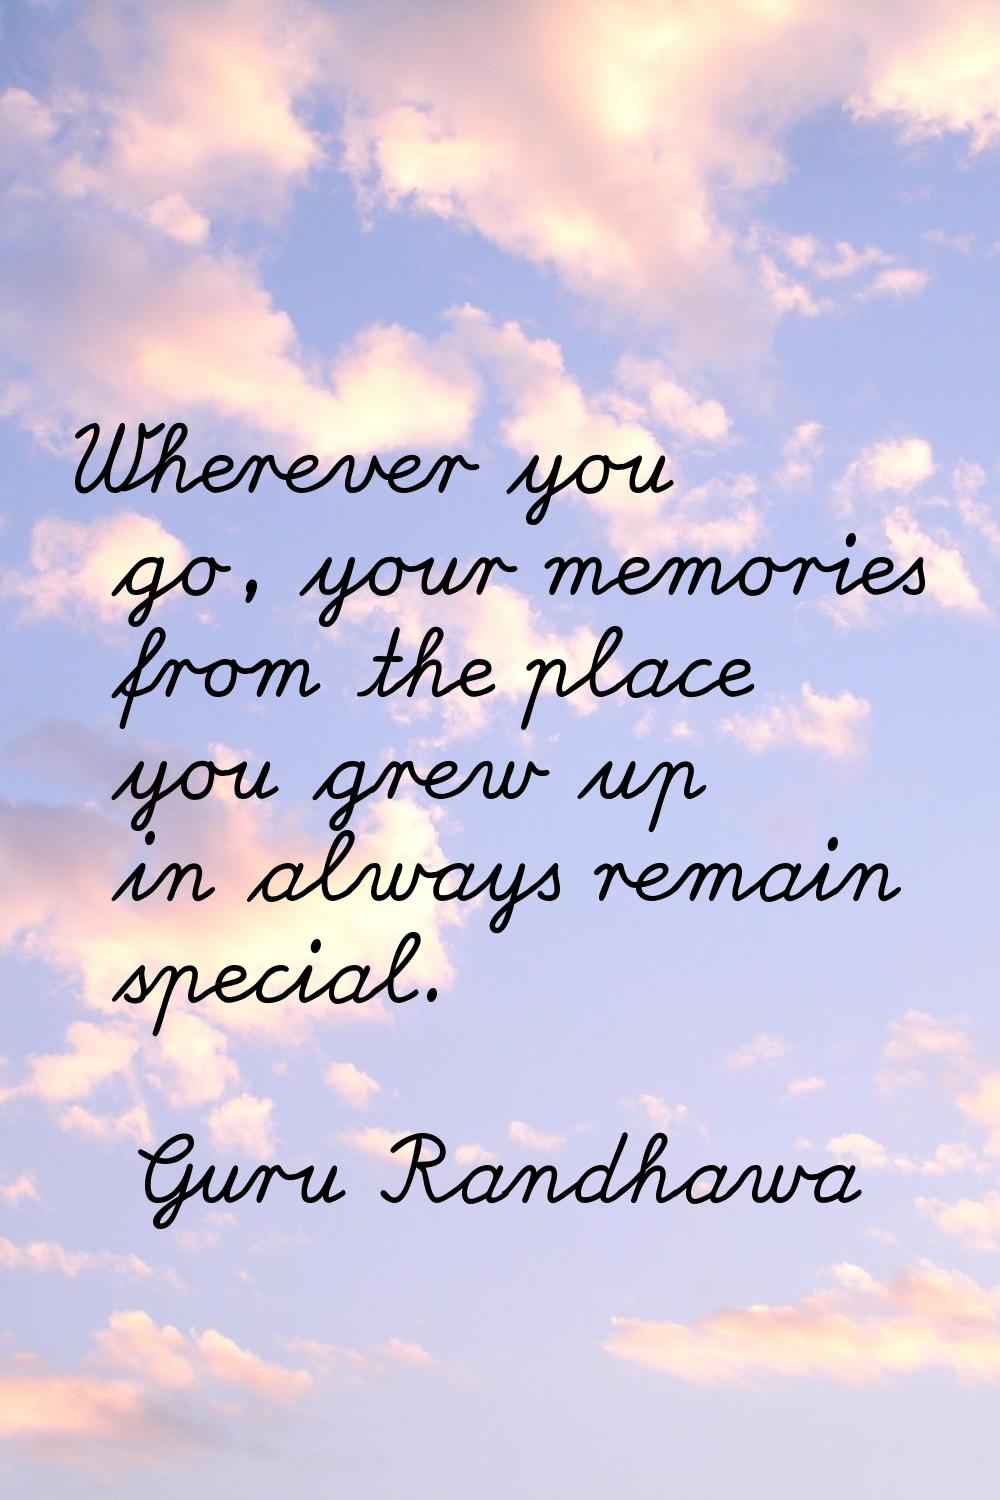 Wherever you go, your memories from the place you grew up in always remain special.